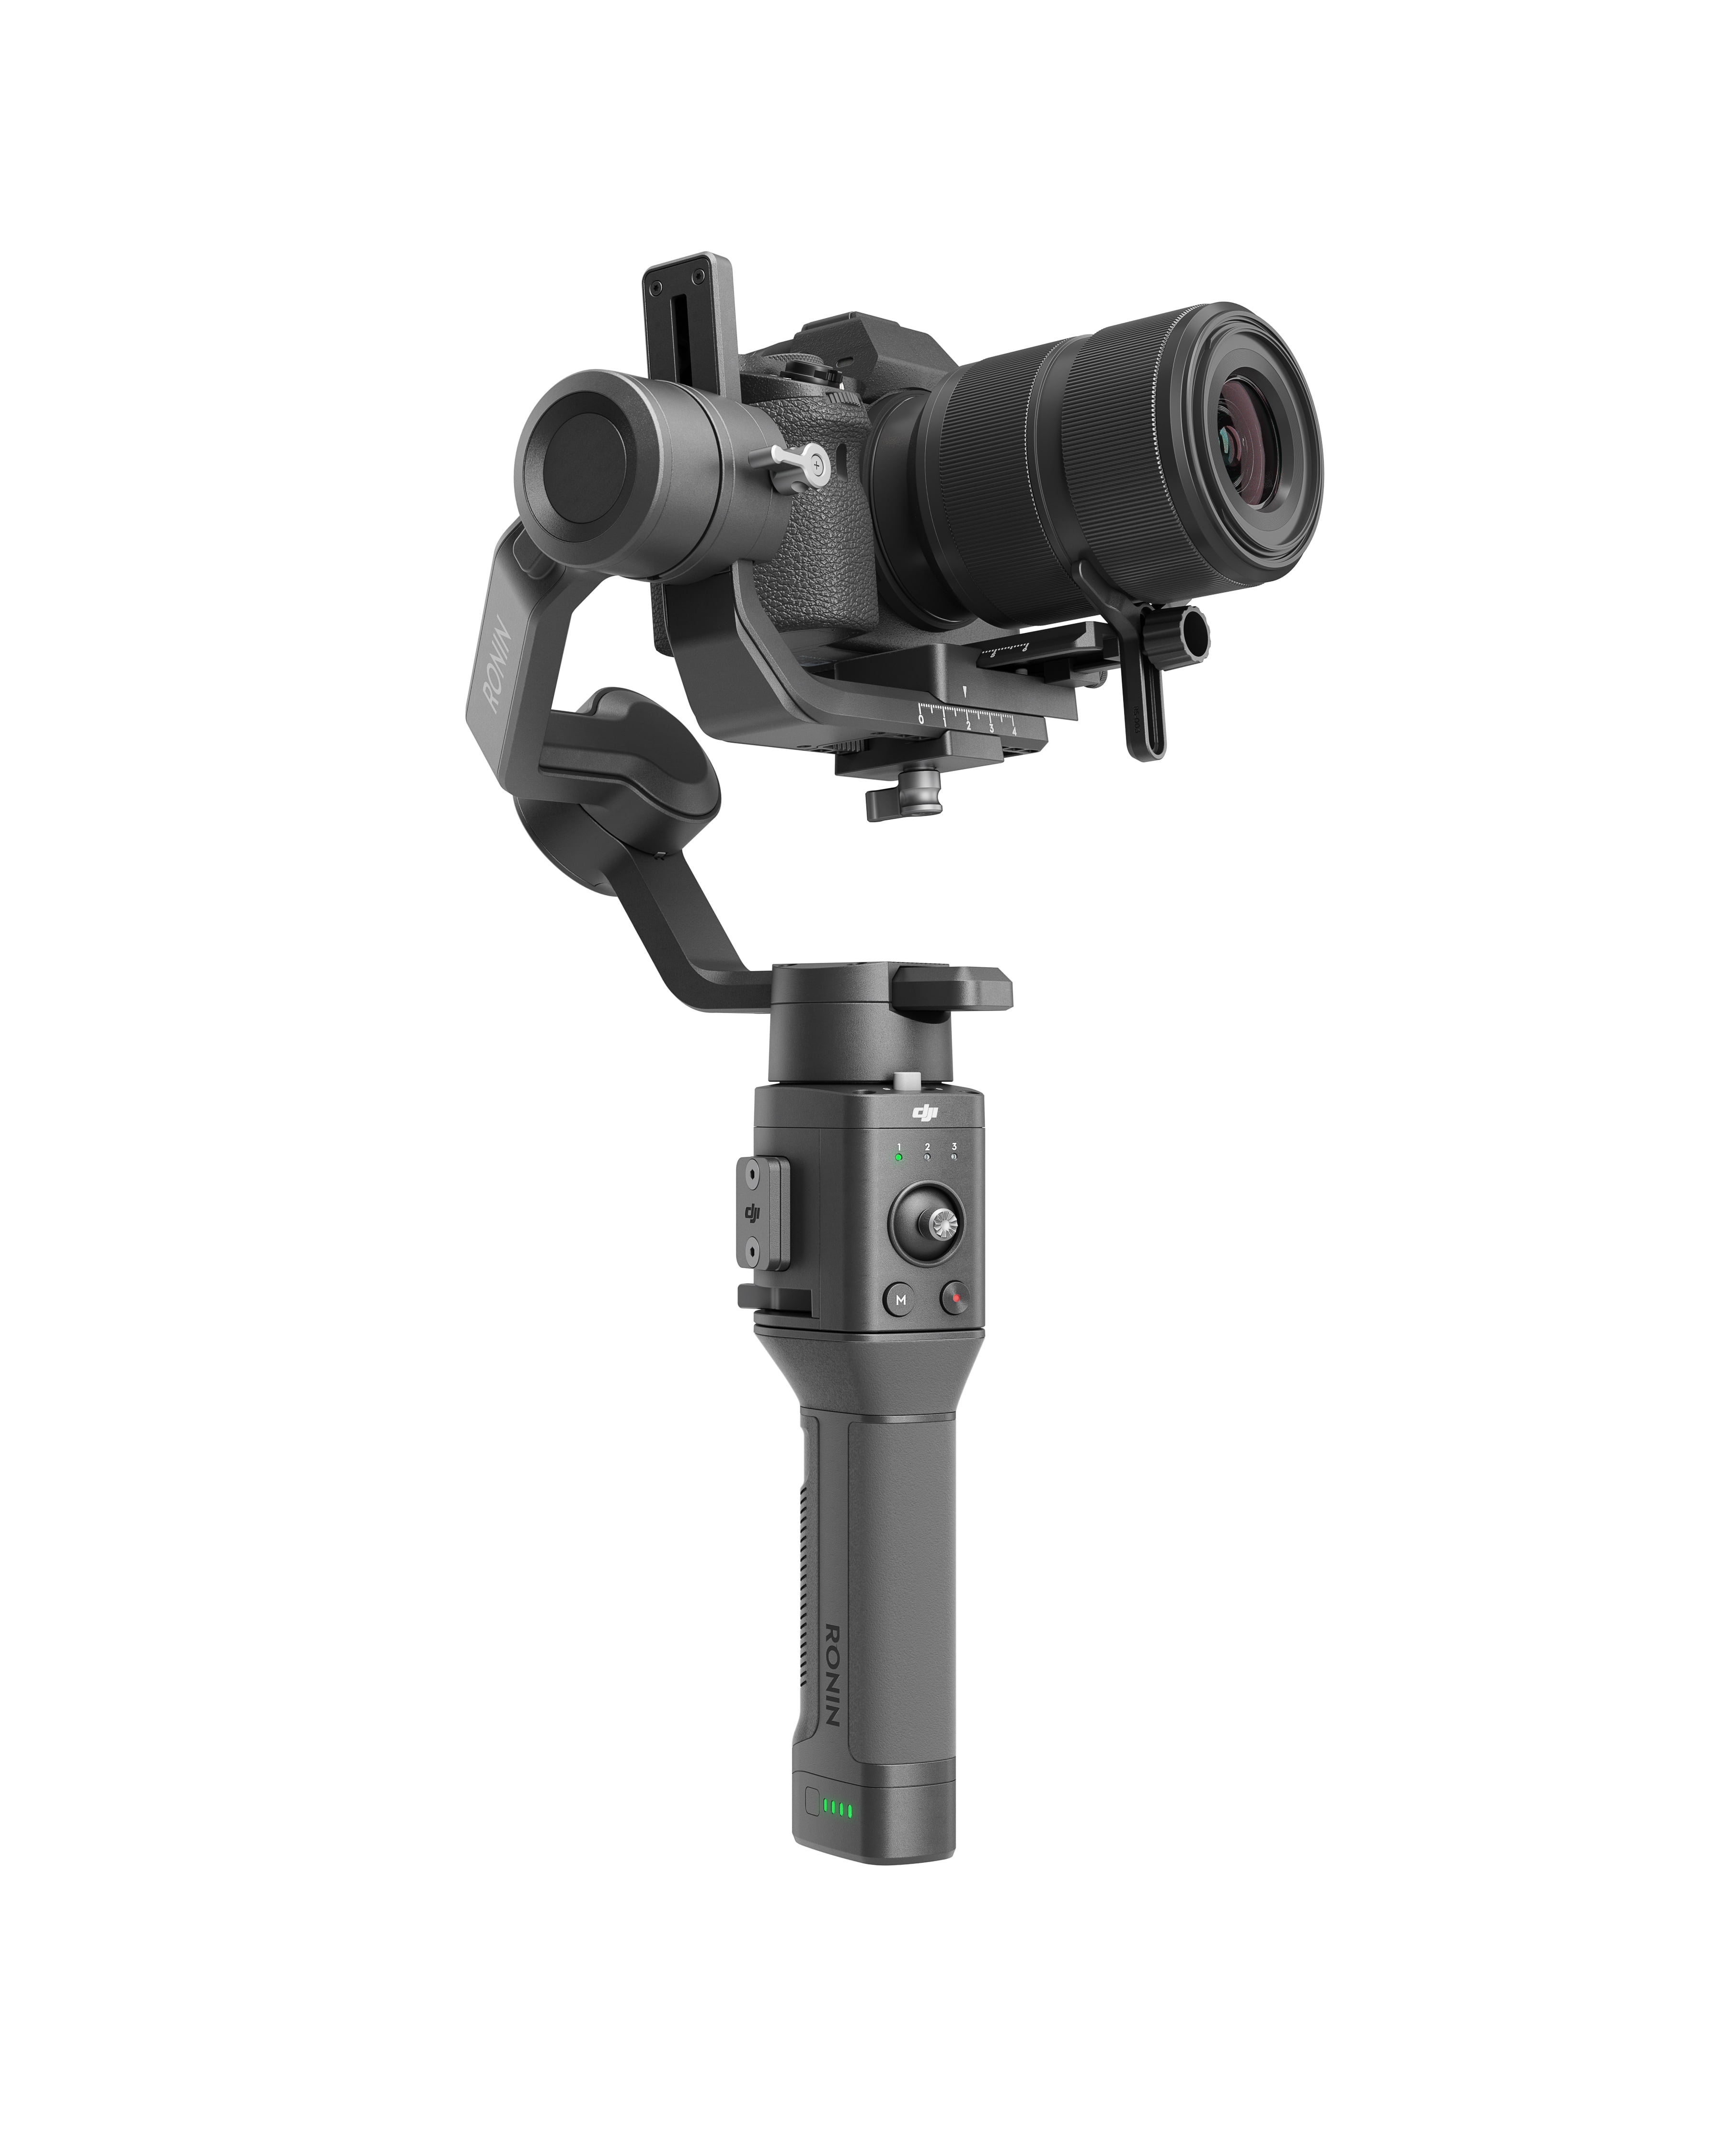 Nikon Sony Panasonic Canon Fujifilm Carbon Fiber Touchscreen 4.5 kg Payload DJI RS 2-3-Axis Gimbal Stabilizer for DSLR and Mirrorless Camera Black Ronin S 